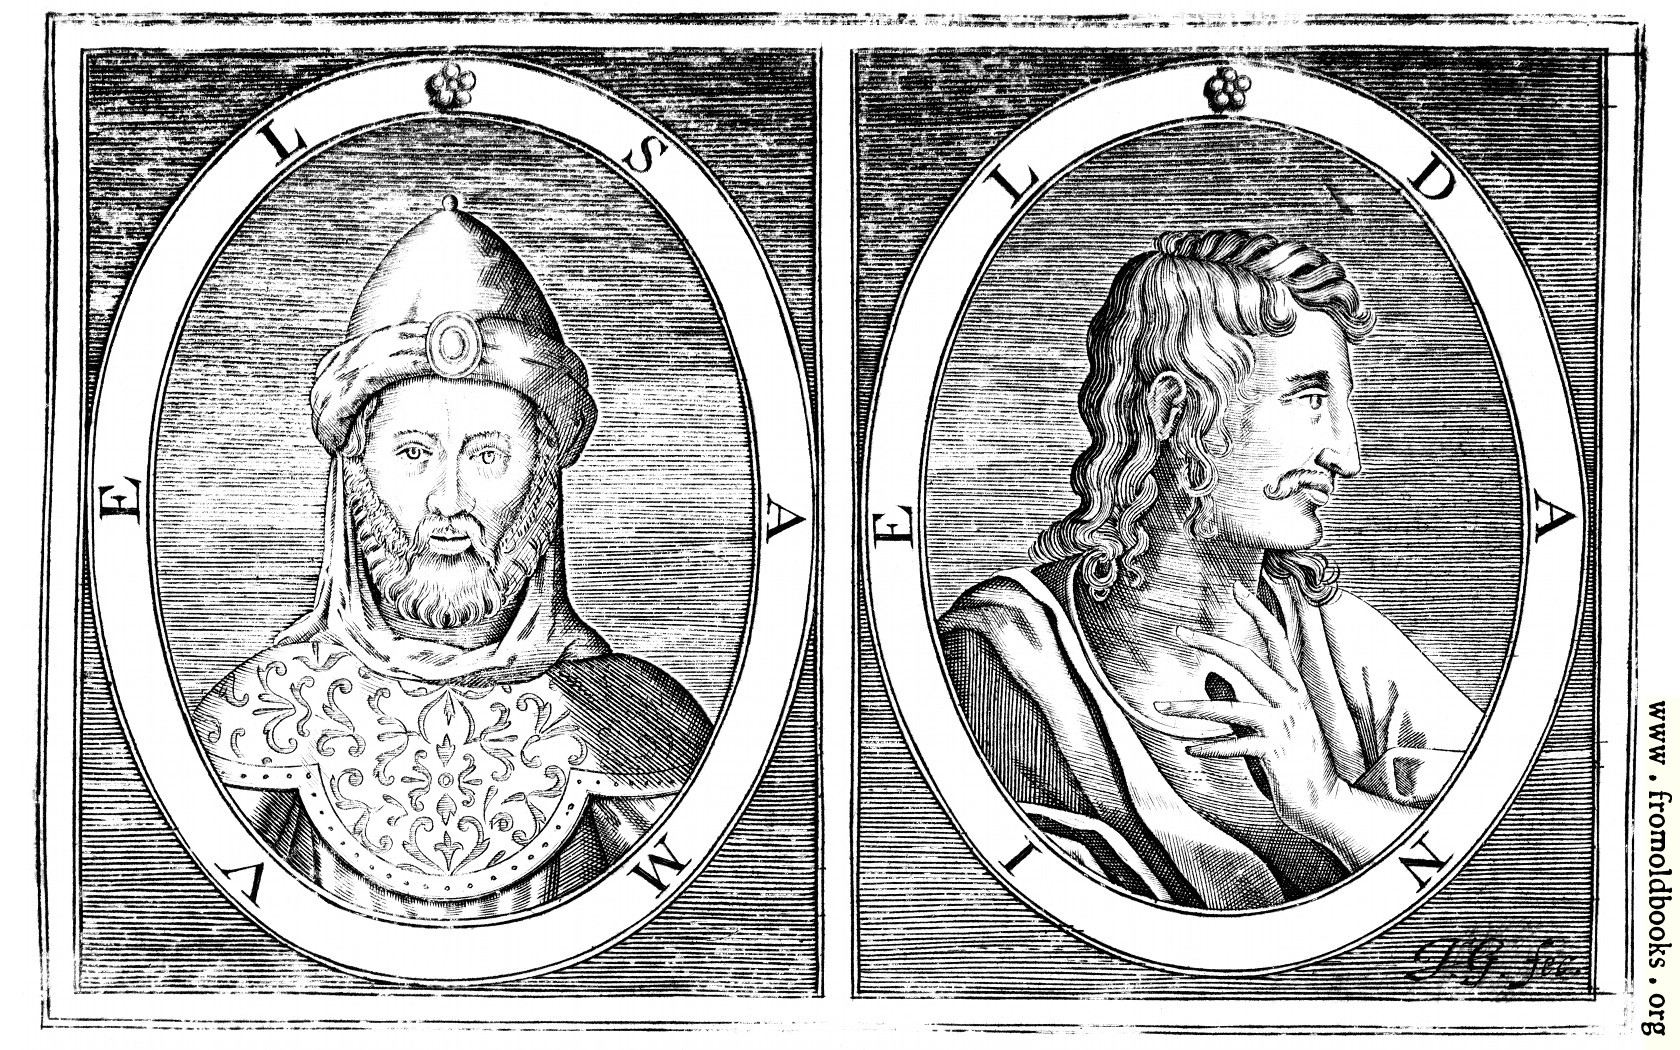 [Picture: Portraits of Samuel and Daniel]